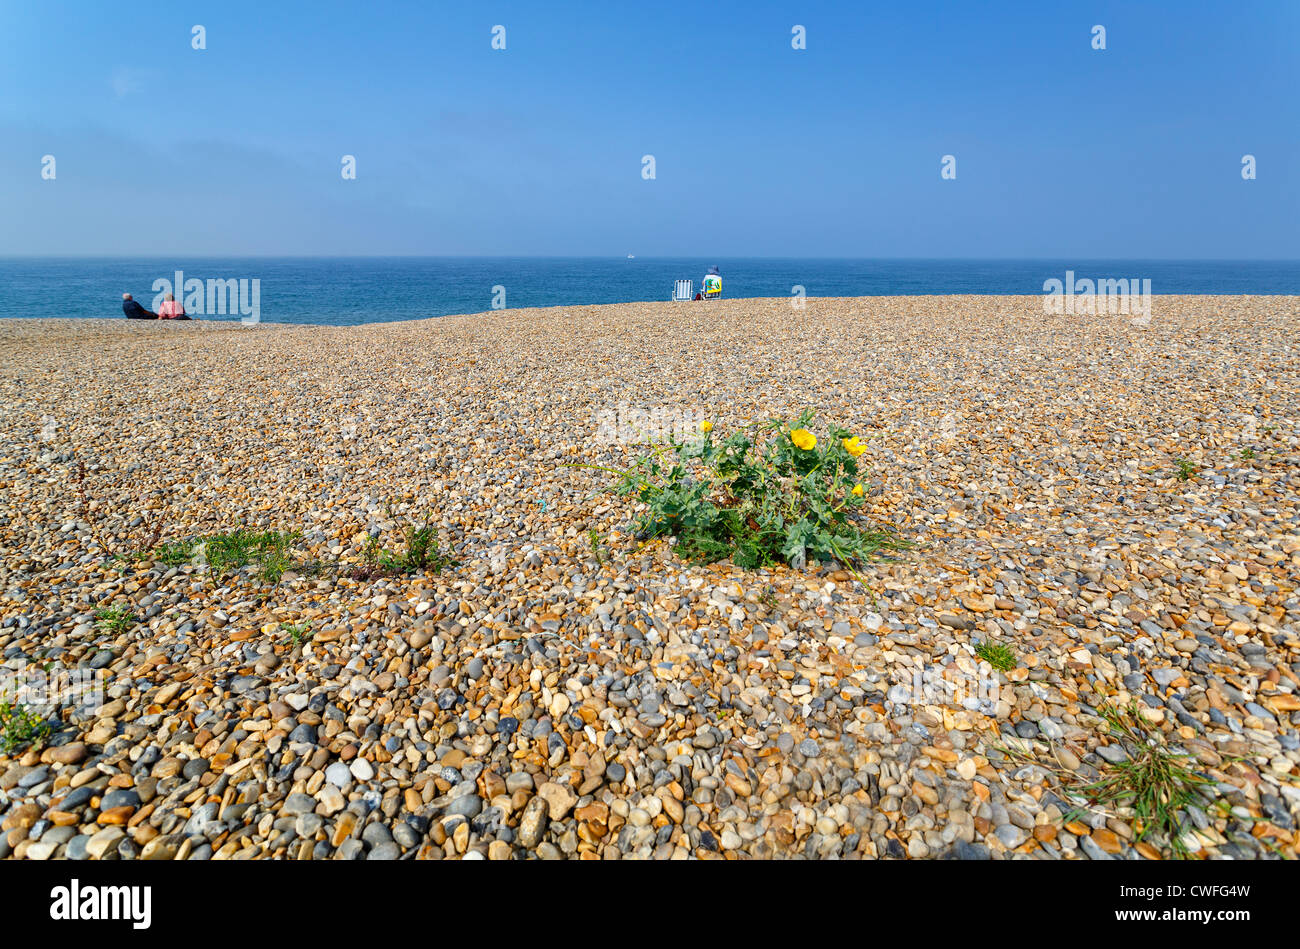 People relaxing on the holiday beach at Weybourne on the 'North Norfolk' coast, UK Stock Photo